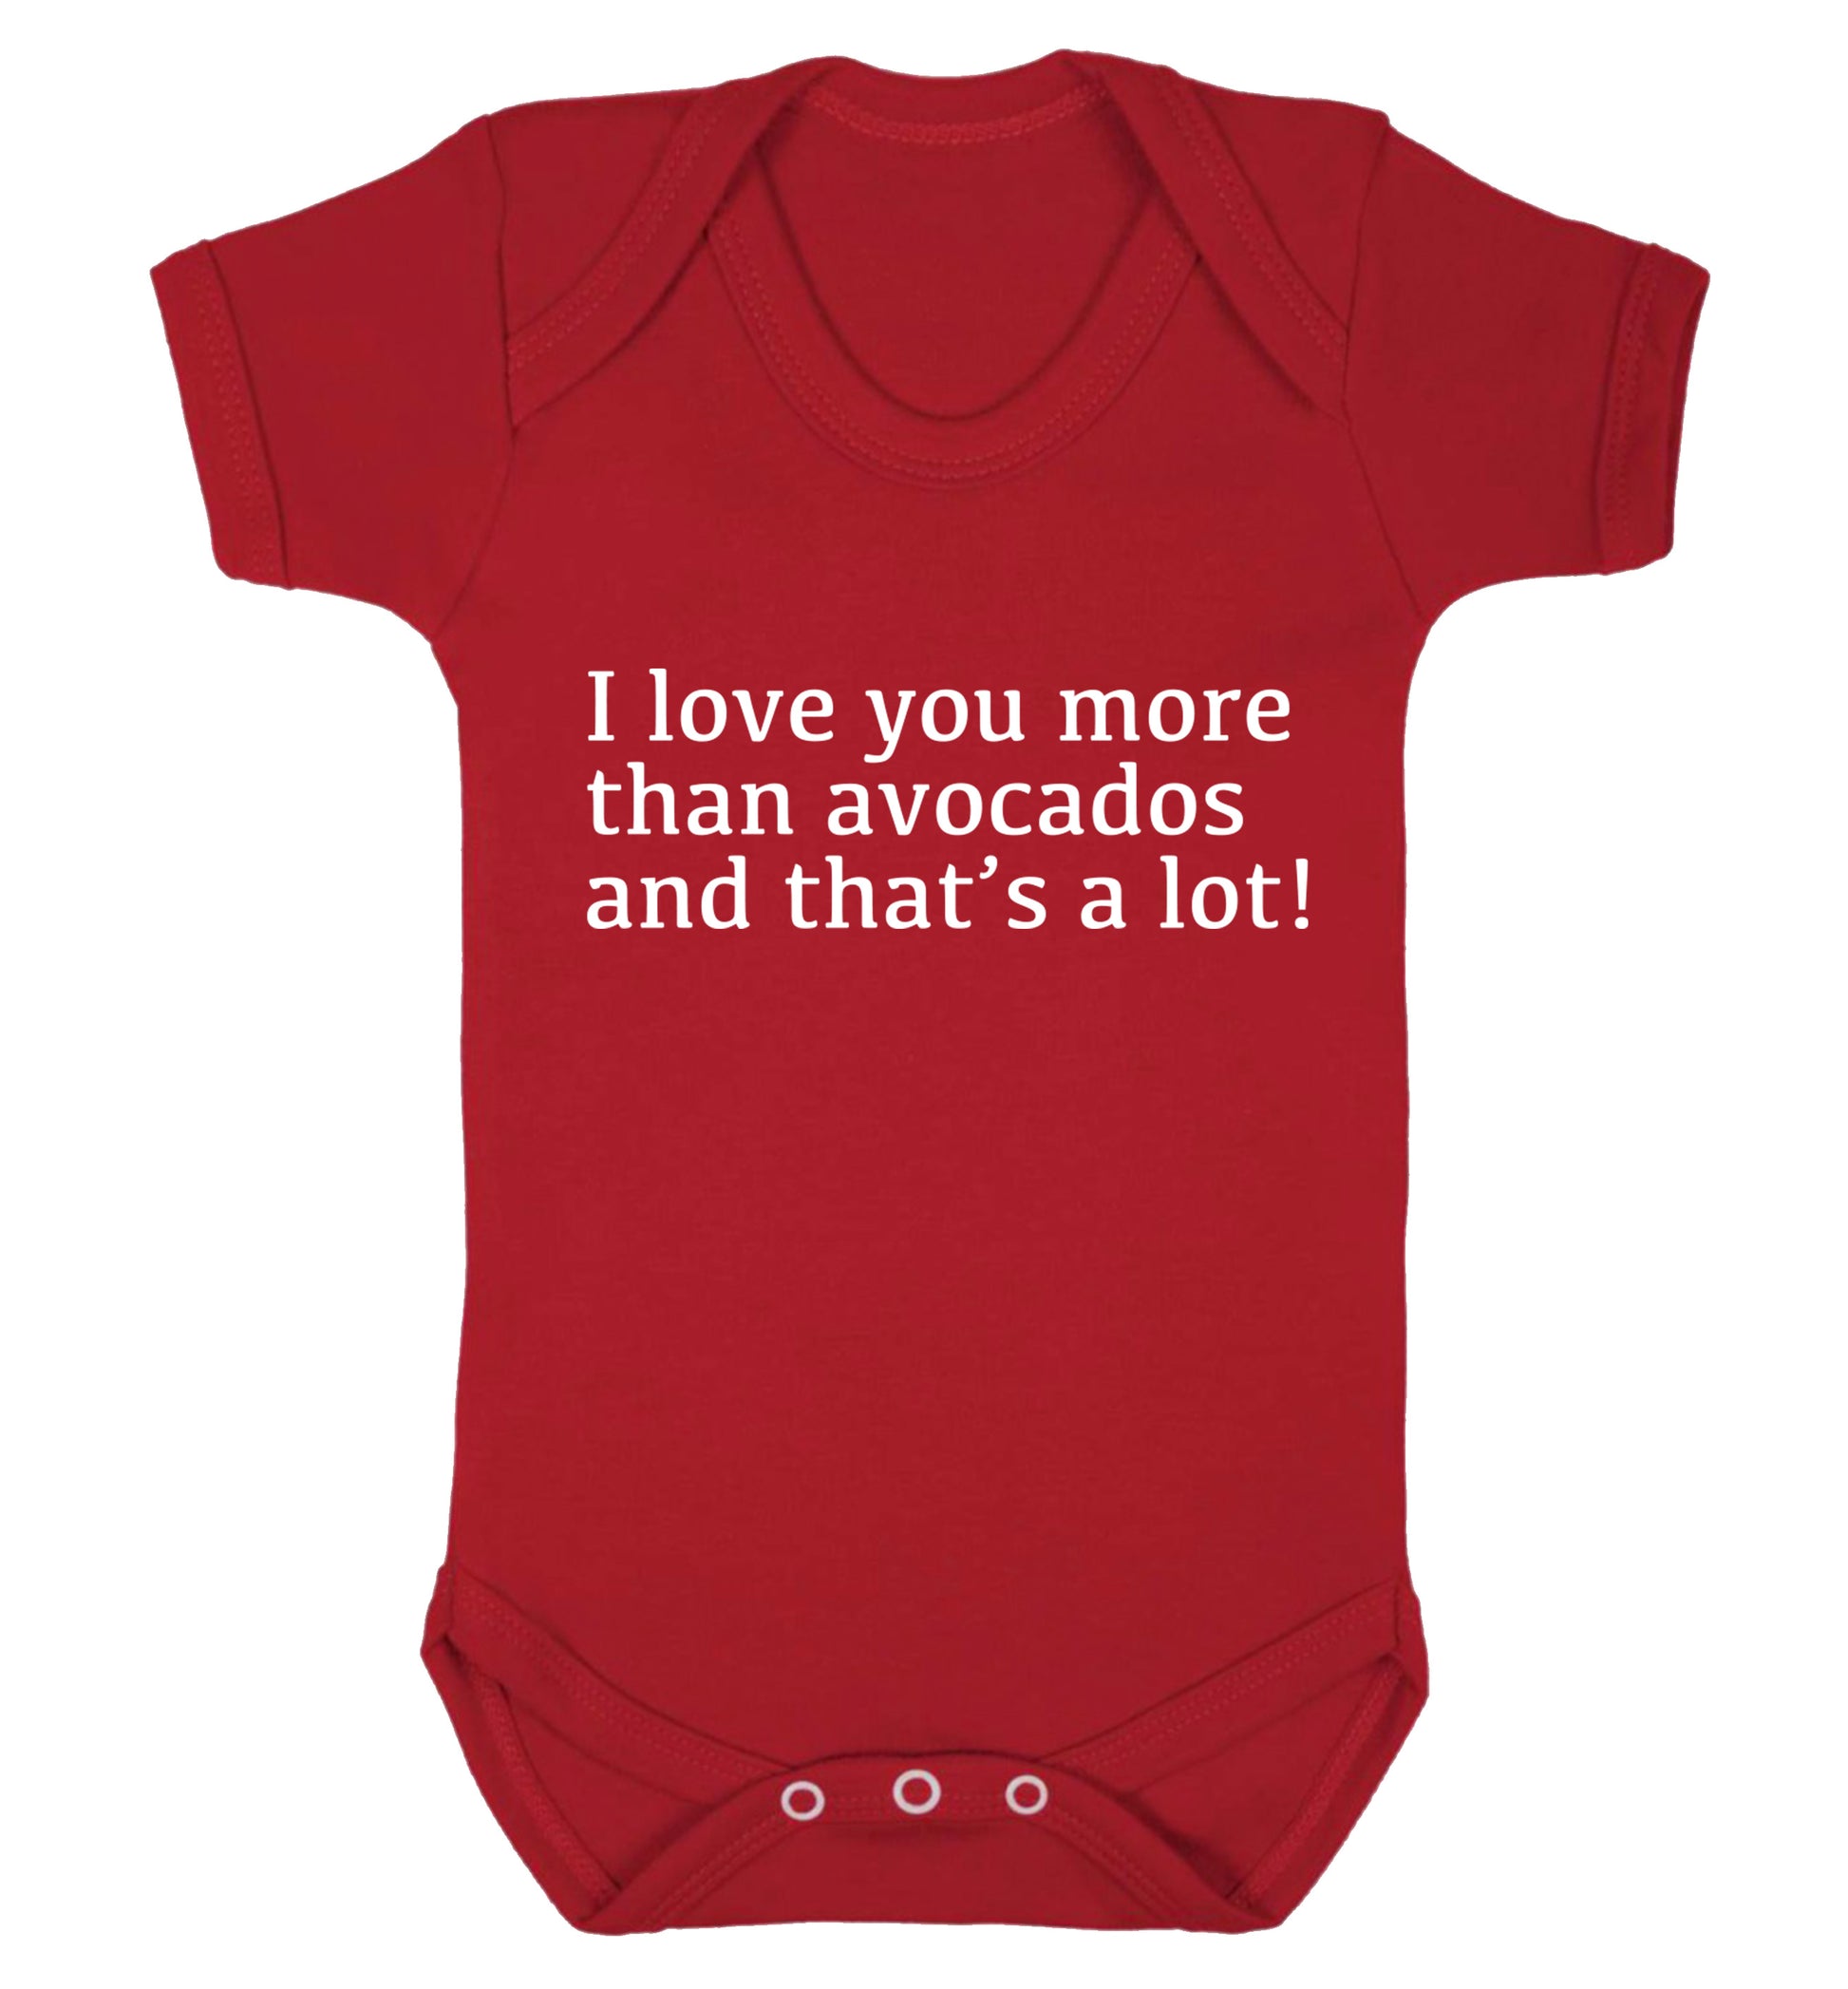 I love you more than avocados and that's a lot Baby Vest red 18-24 months